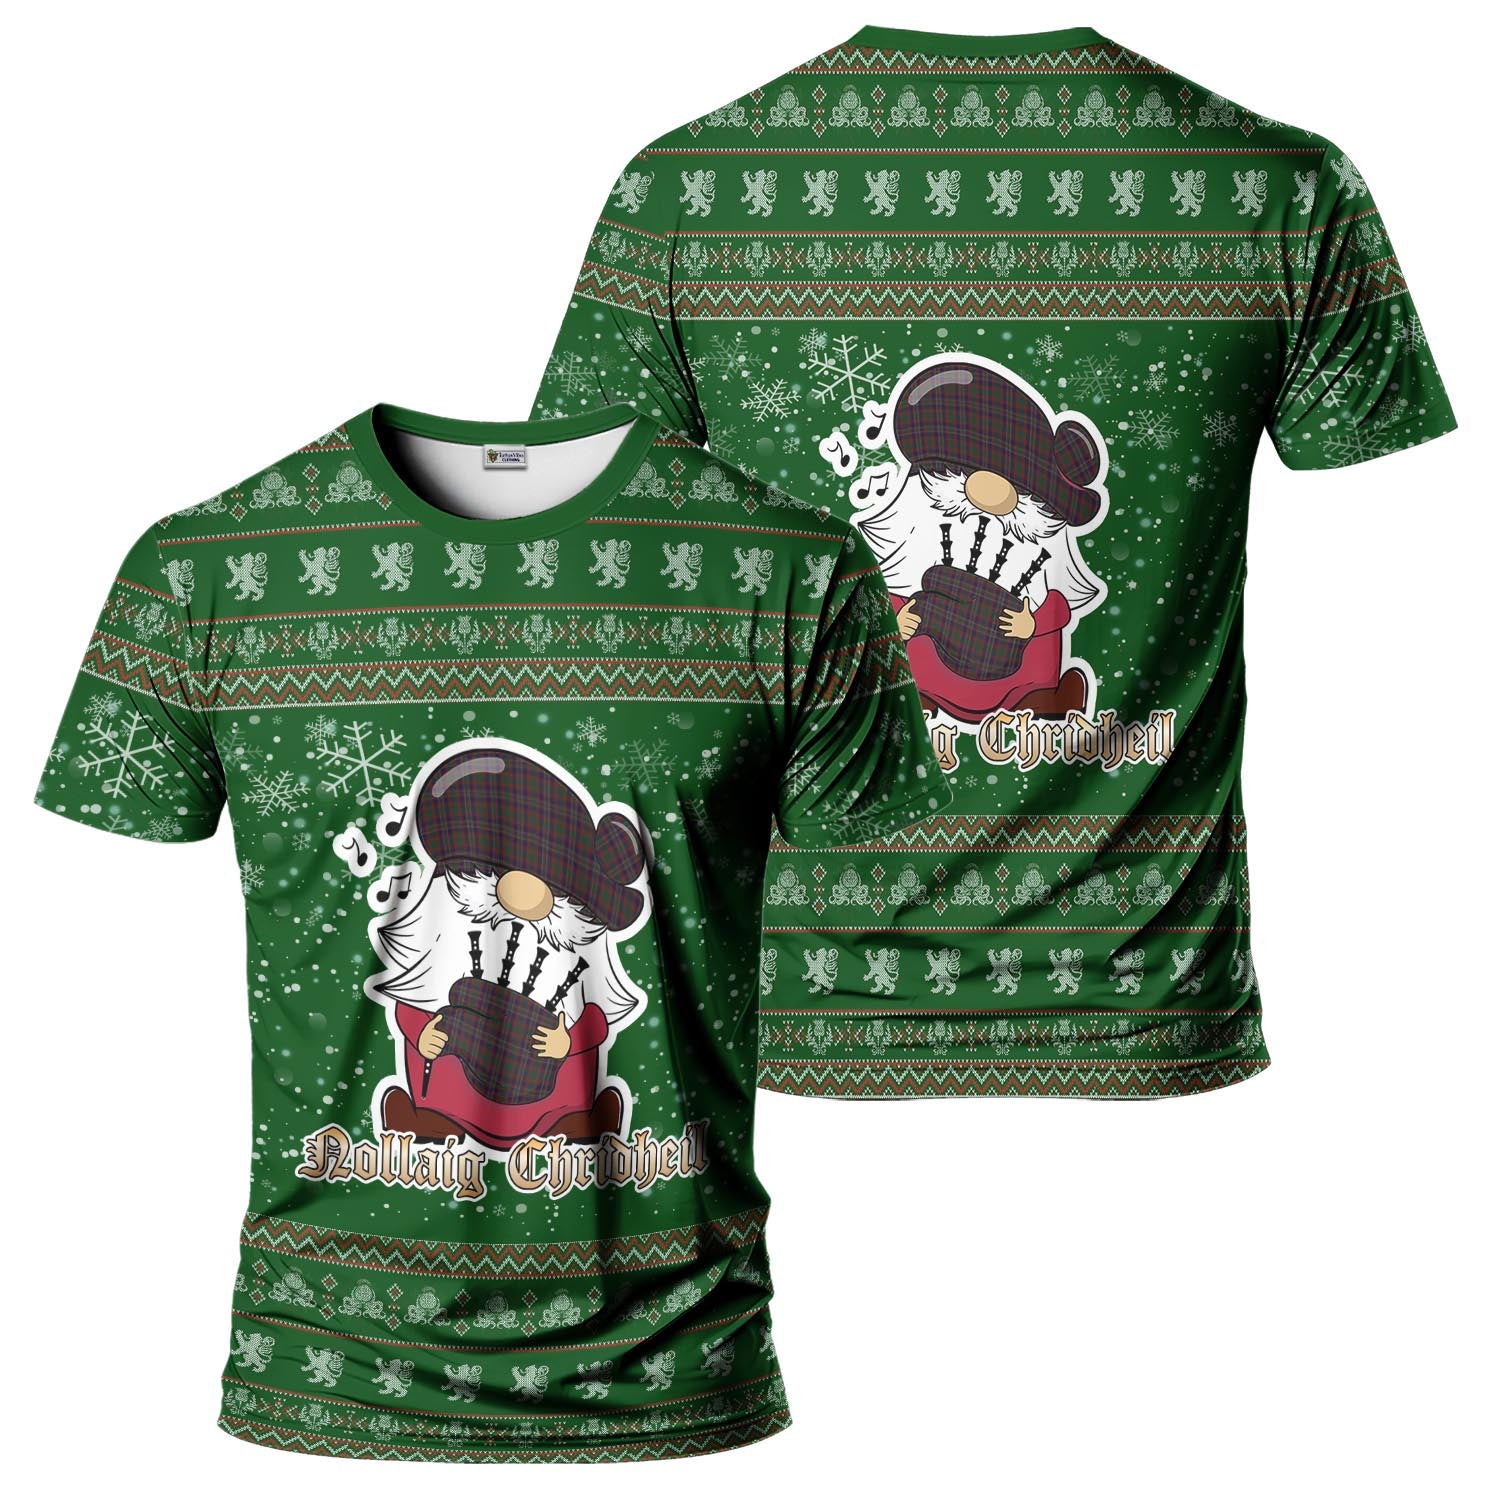 Cork County Ireland Clan Christmas Family T-Shirt with Funny Gnome Playing Bagpipes Men's Shirt Green - Tartanvibesclothing